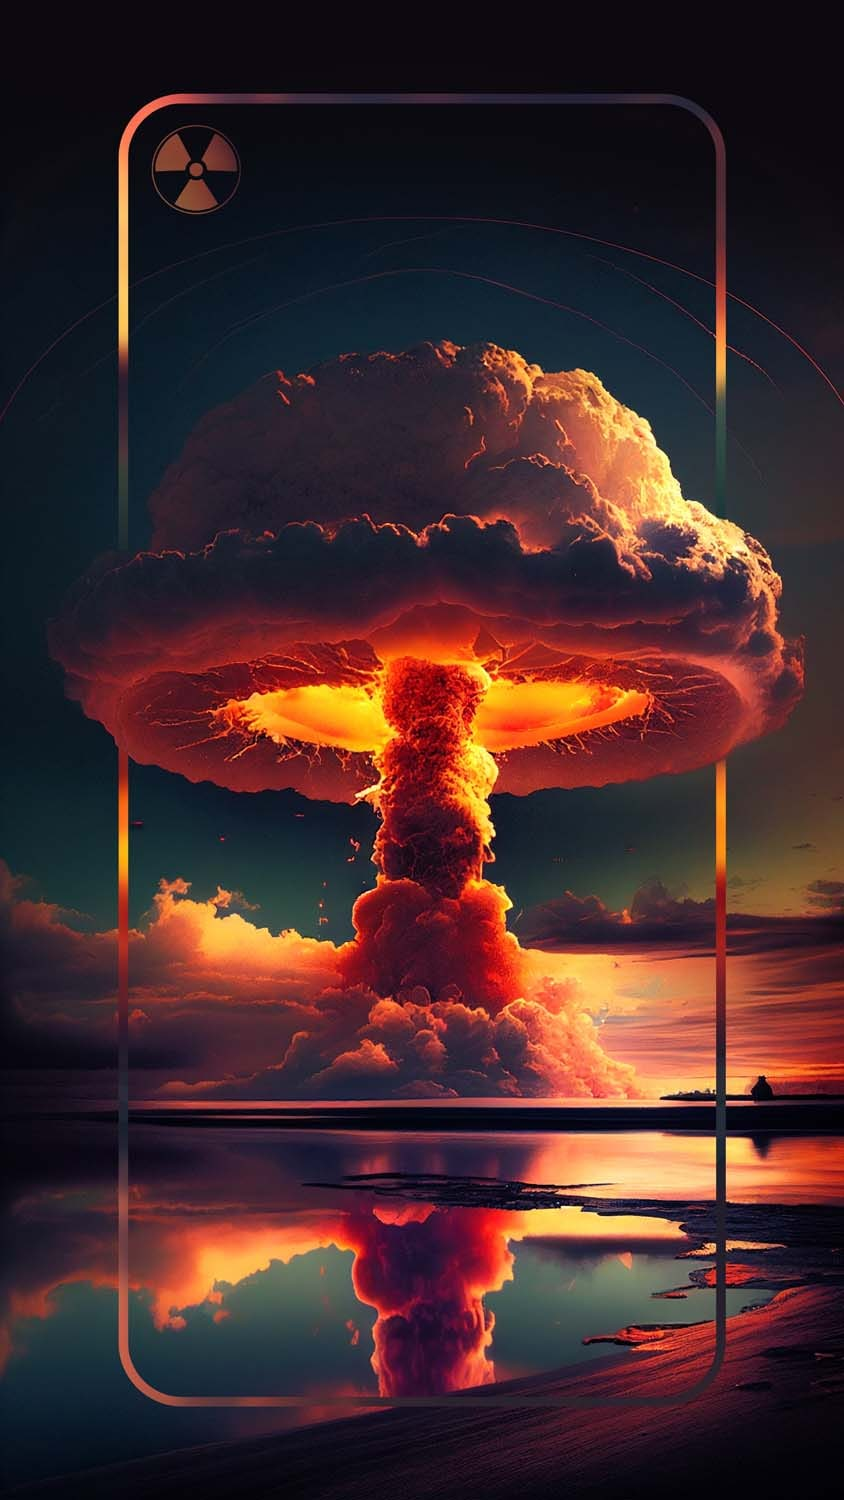 Mobile wallpaper Death Dark Explosion Skull Nuclear Explosion 1314865  download the picture for free